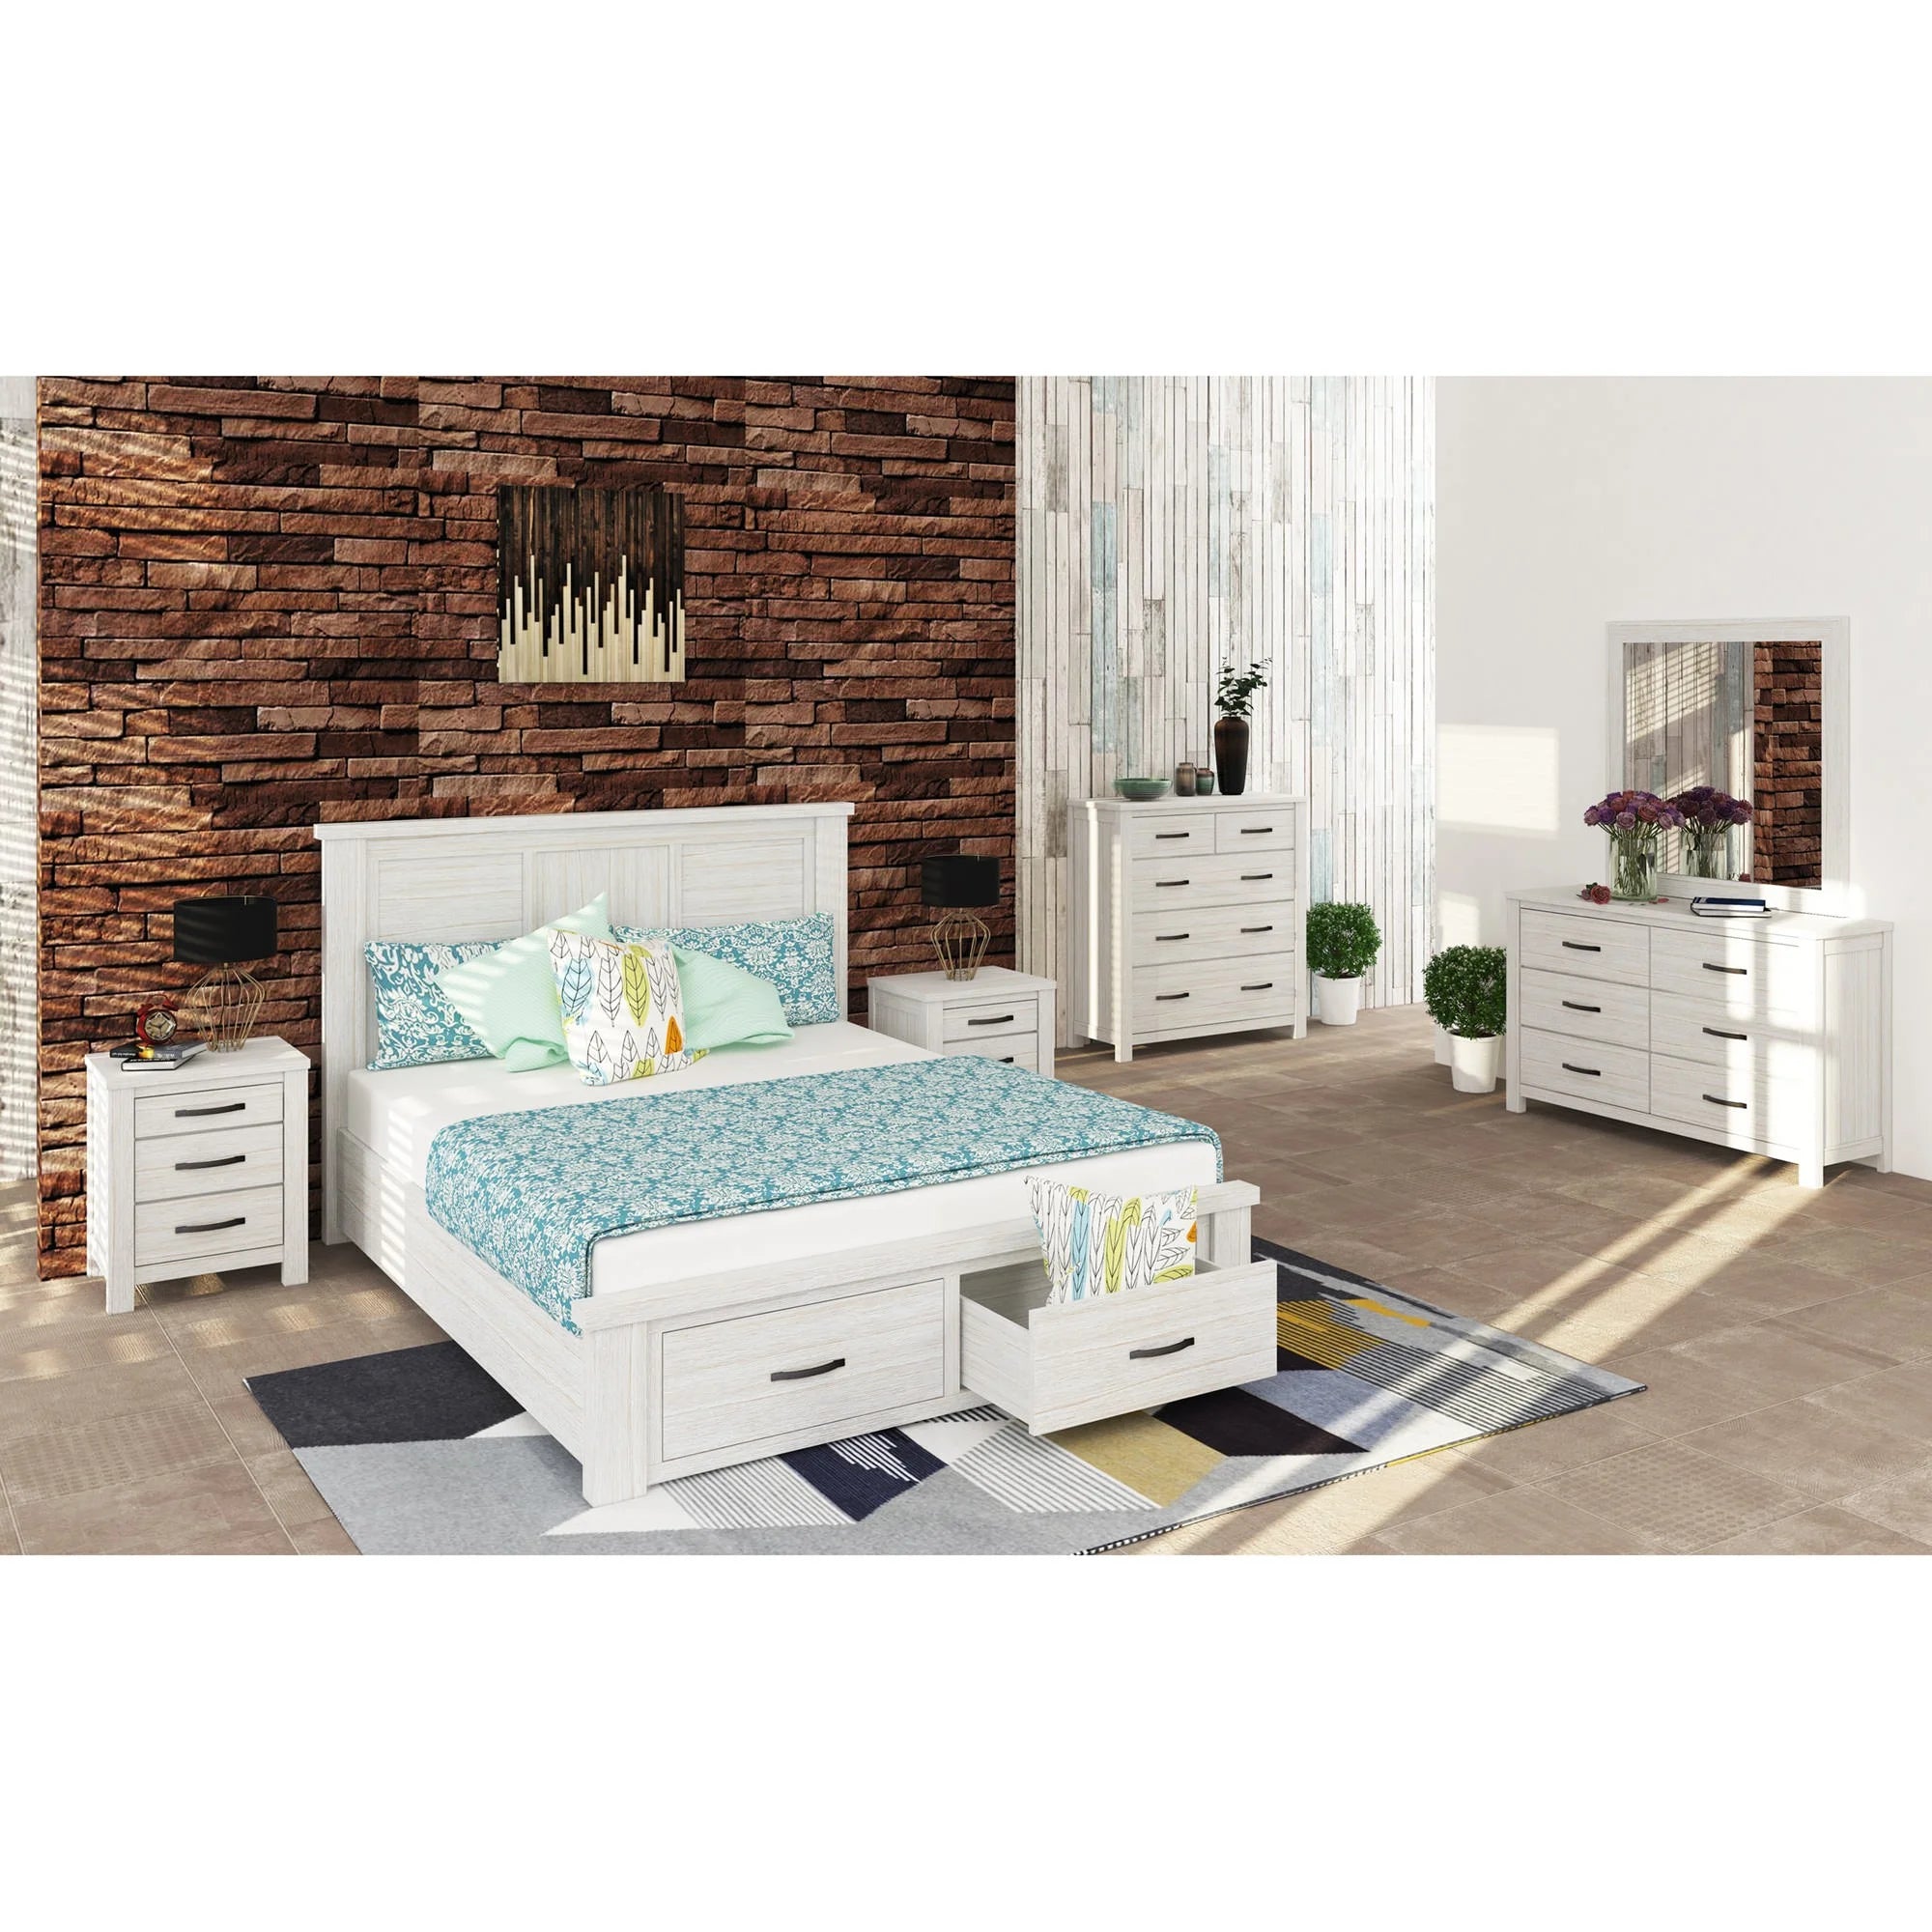 Frankie Mountain Ash Timber 5 Piece Bedroom Suite with Dresser & Mirror, King